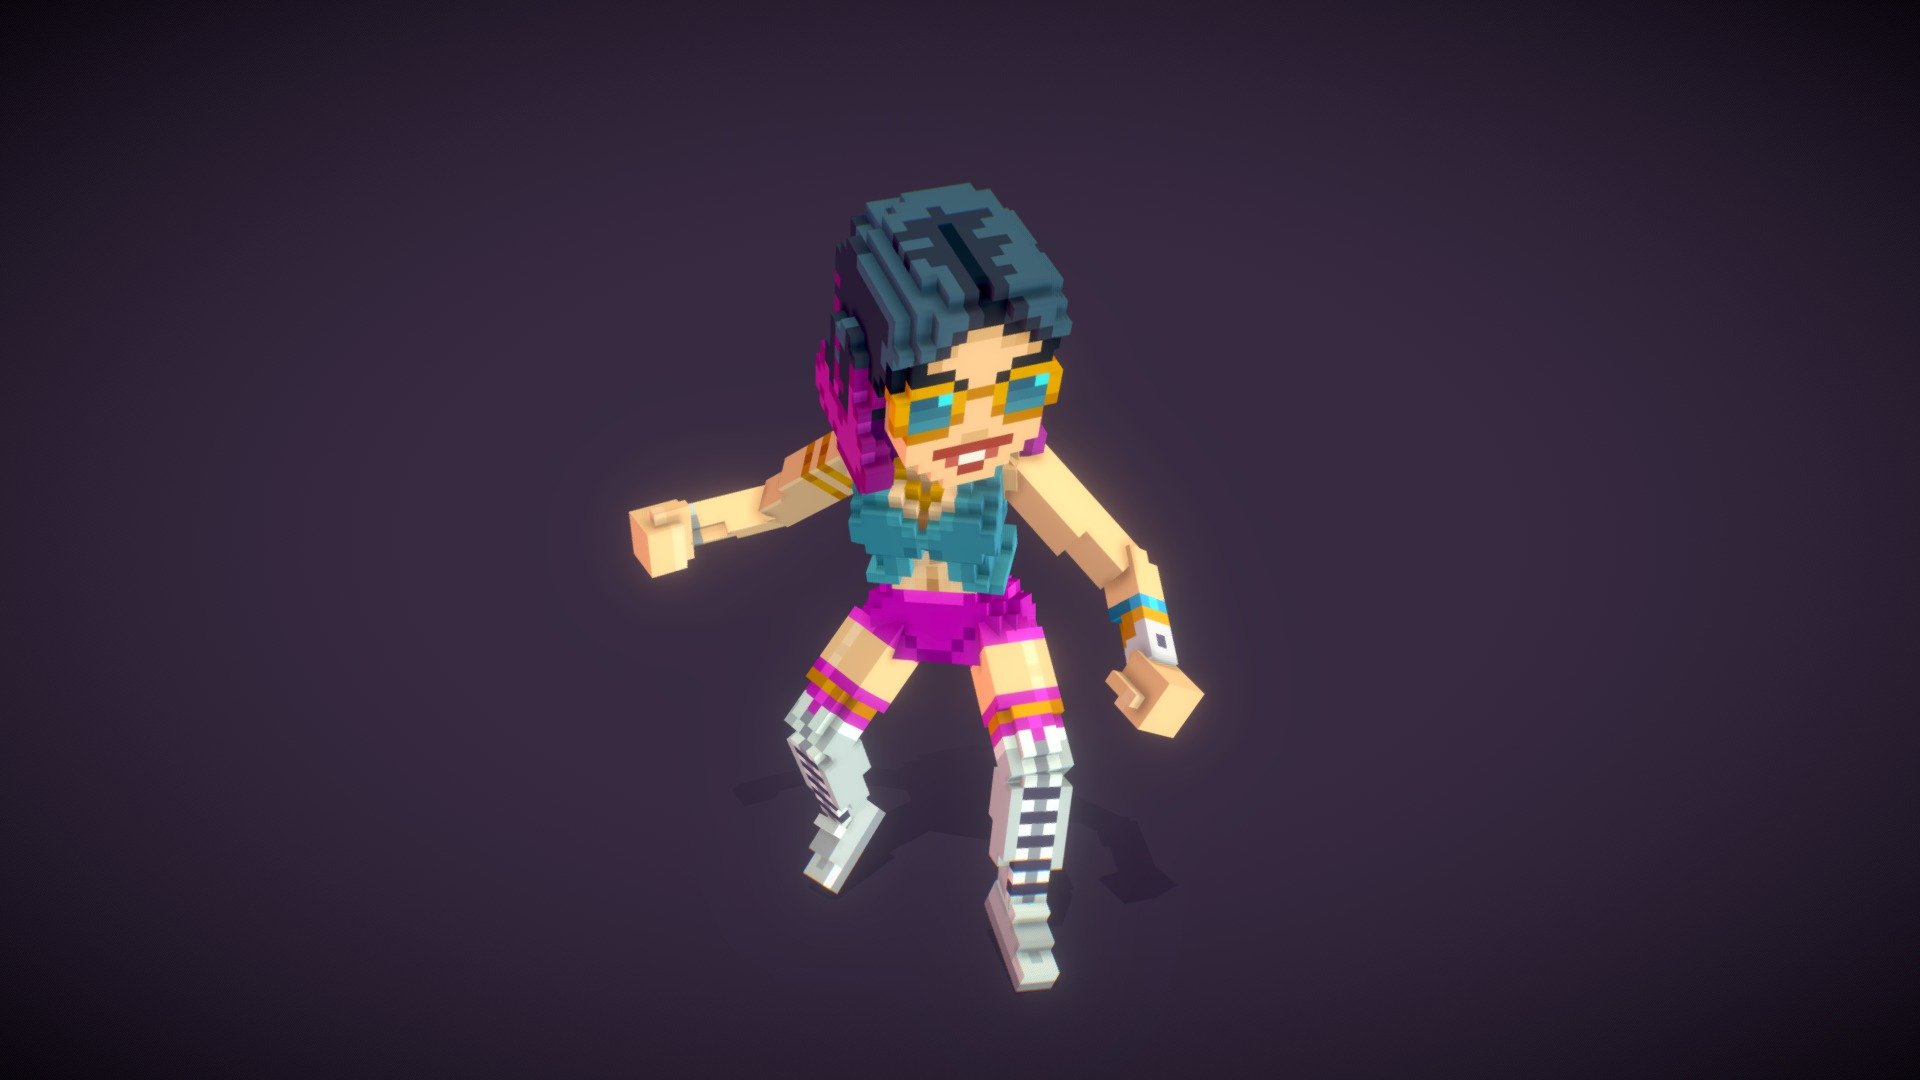 This Party Girl is a character created for the sandbox game 3d model